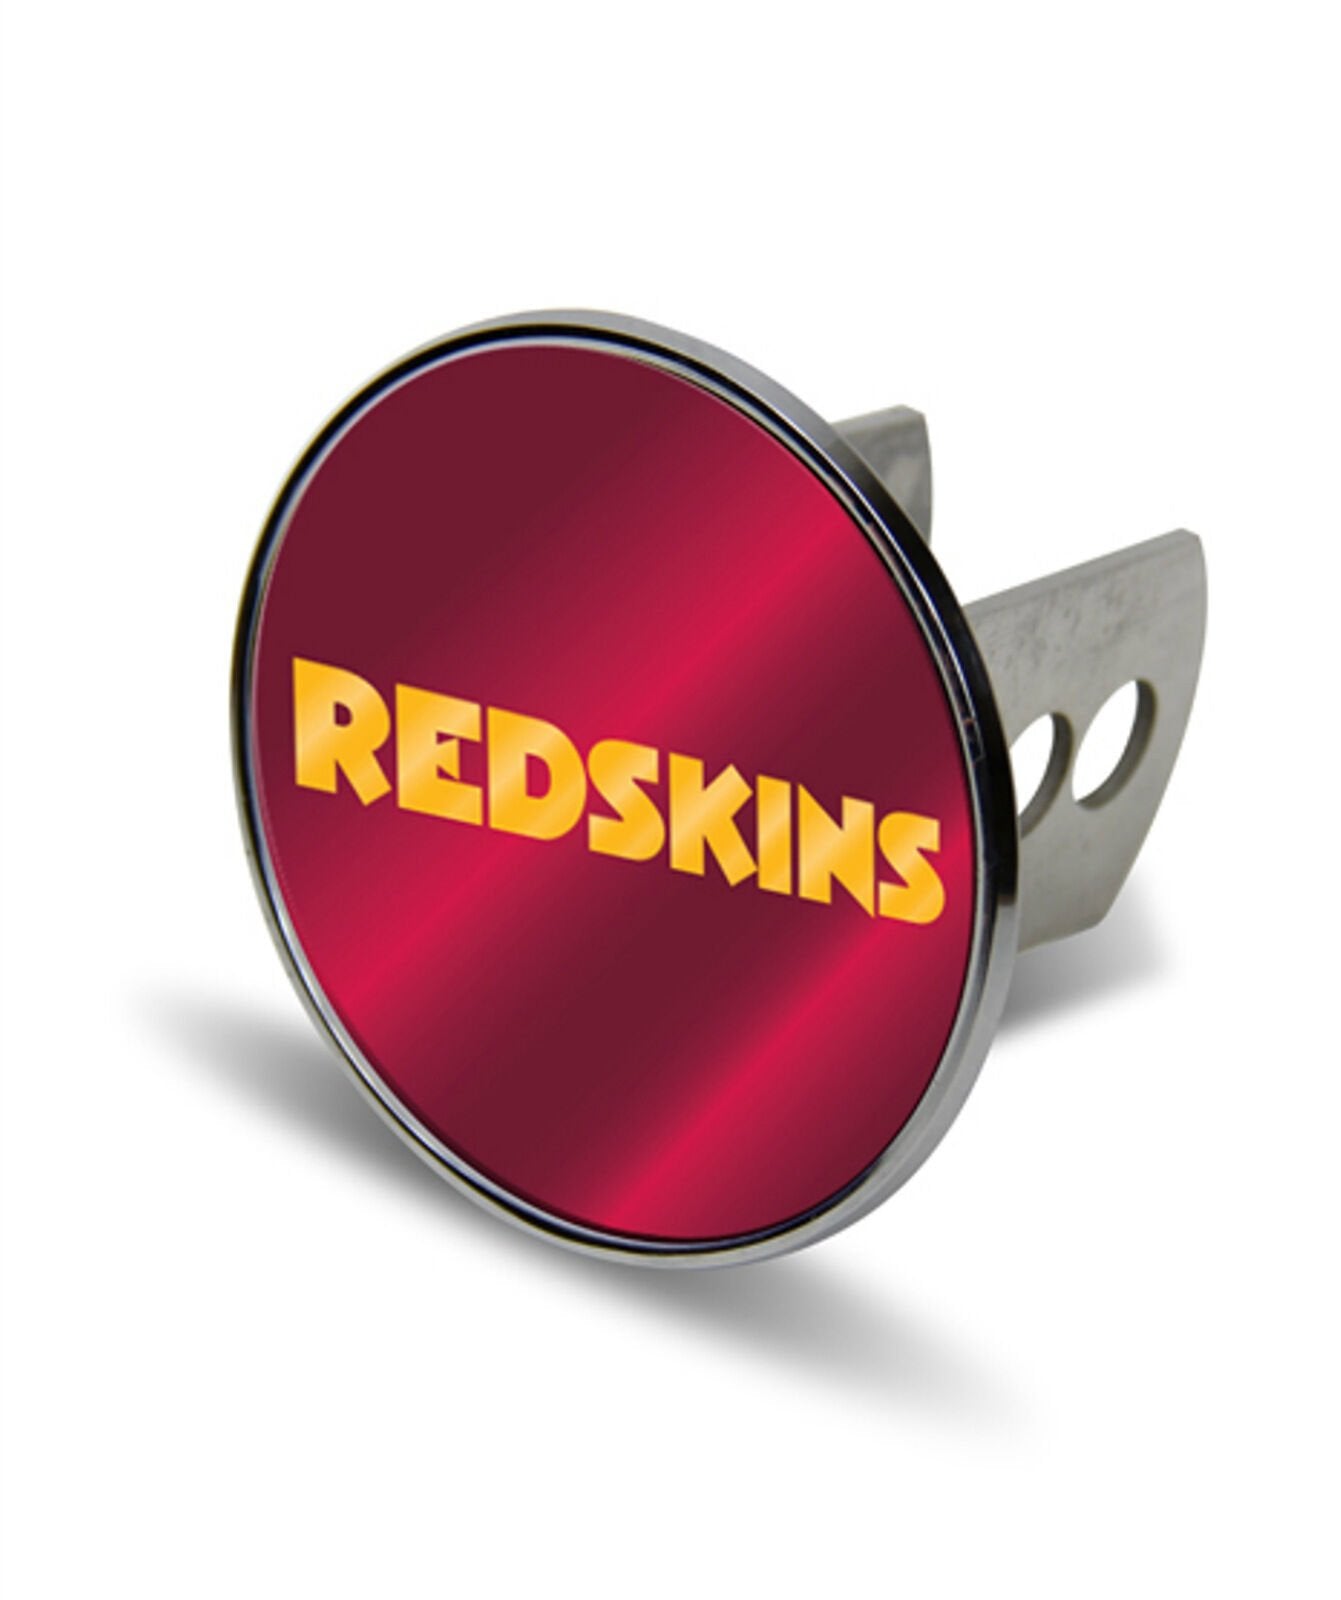 Washington Redskins Commanders Solid Metal Hitch Cover with Laser Cut Mirrored Acrylic Logo for 2 Inch Receivers